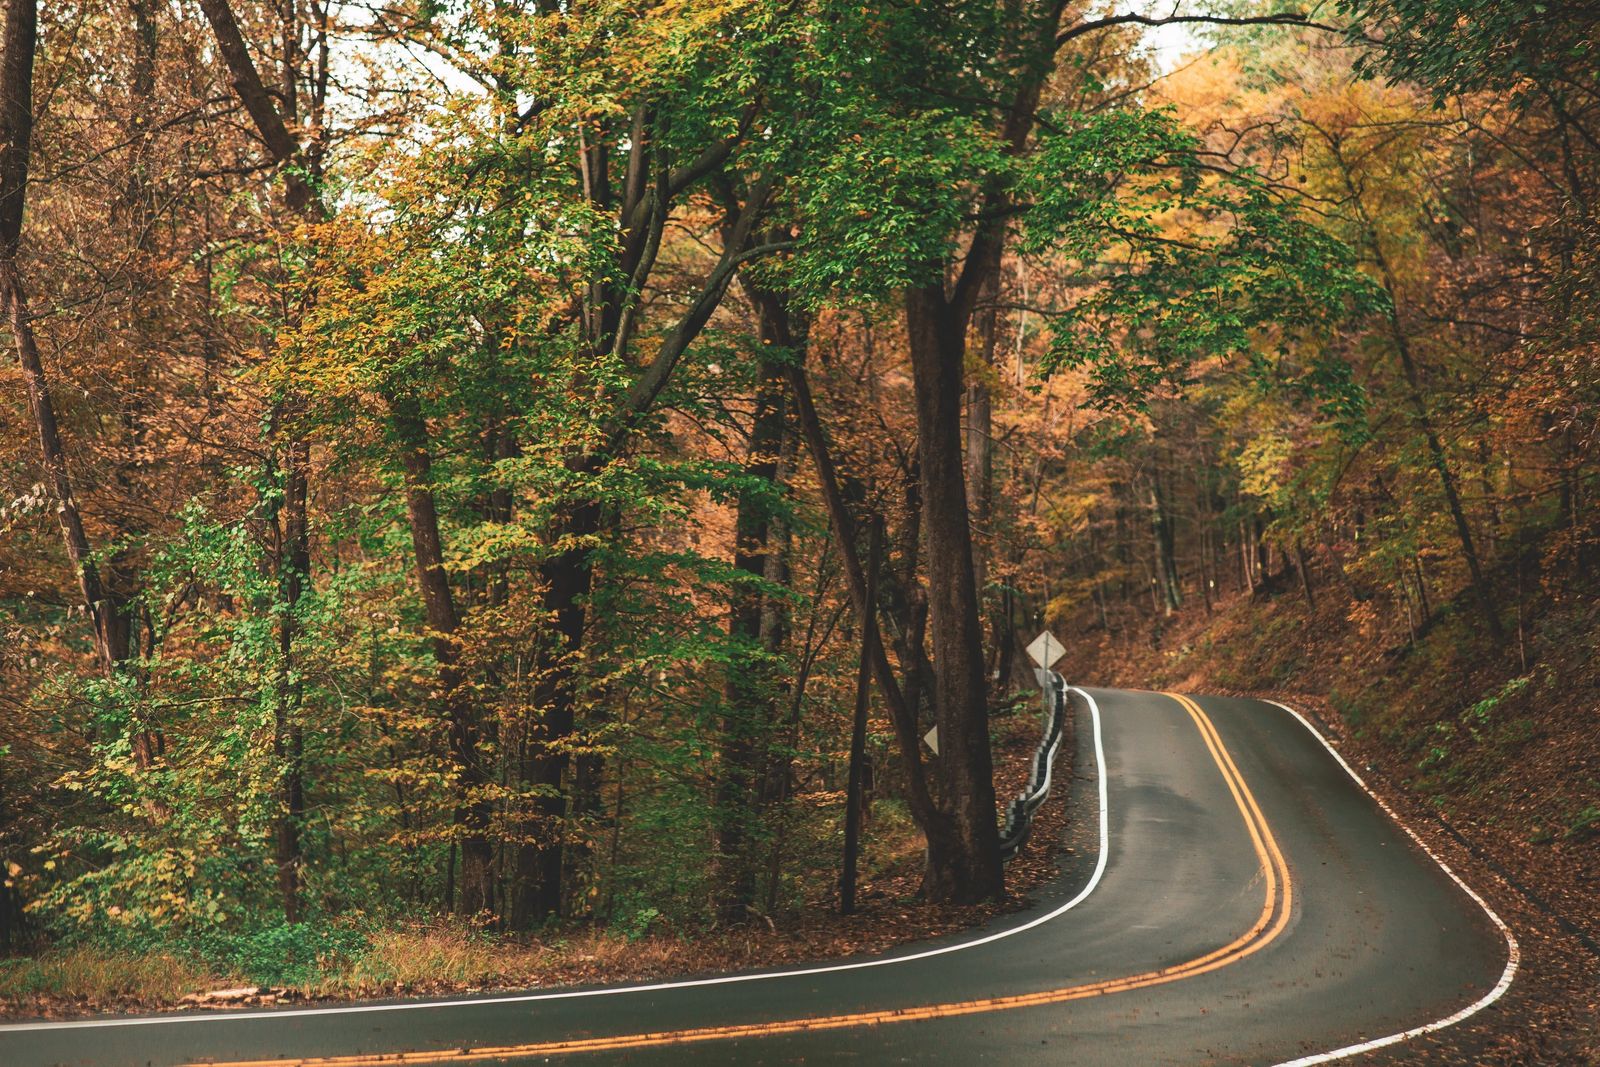 Scenic Road Trip For Fall Colors In The USA